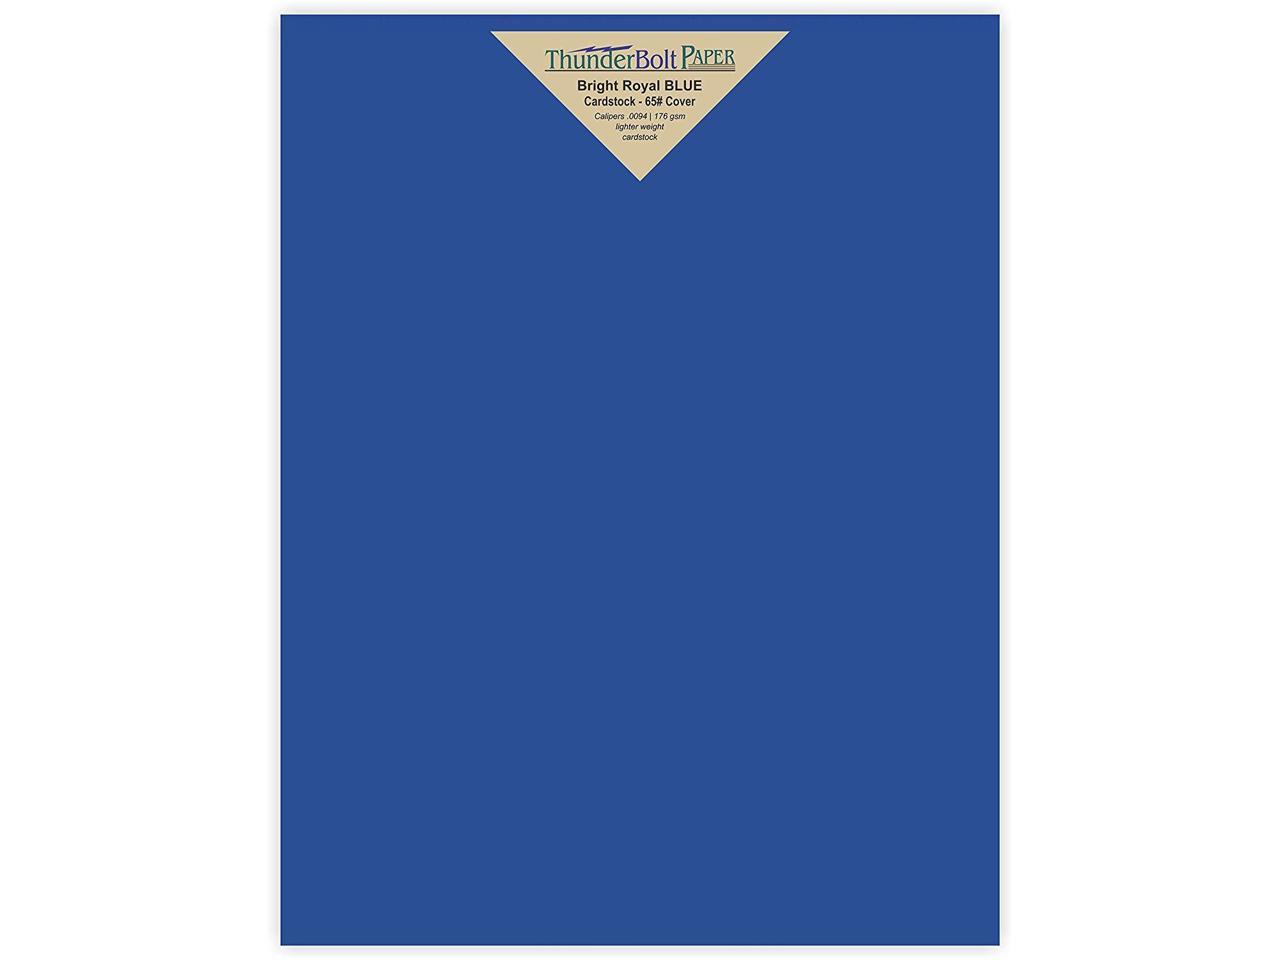 65Cover/45Bond Light Weight Card Stock Bright Printable Smooth Paper Surface Photo|Card|Frame Size 150 Bright Royal Blue 65# Cardstock Paper 4 X 6 4X6 Inches